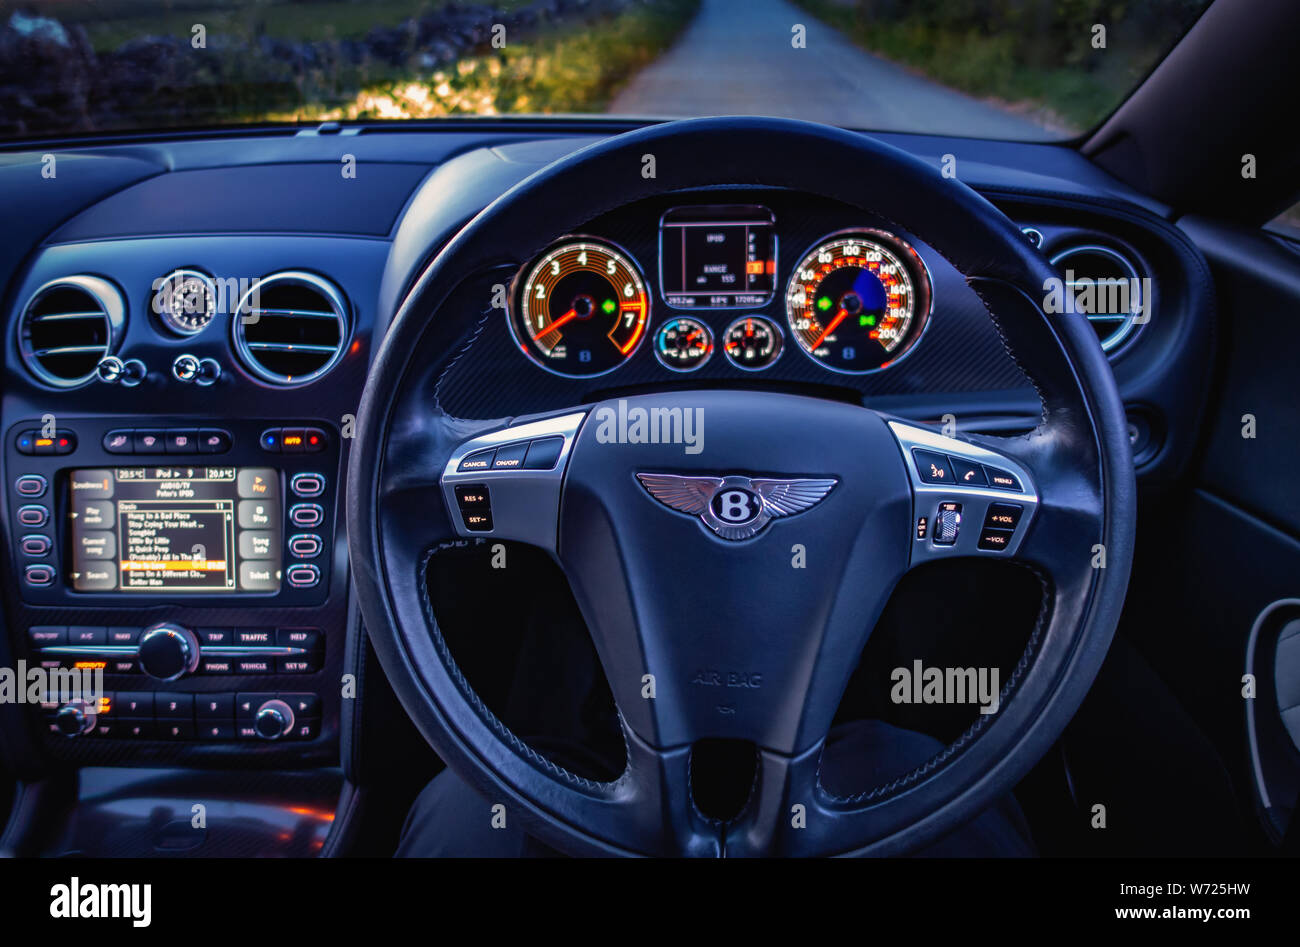 Steering wheel and dashboard of a Bentley Continental GTC Supersport car Stock Photo